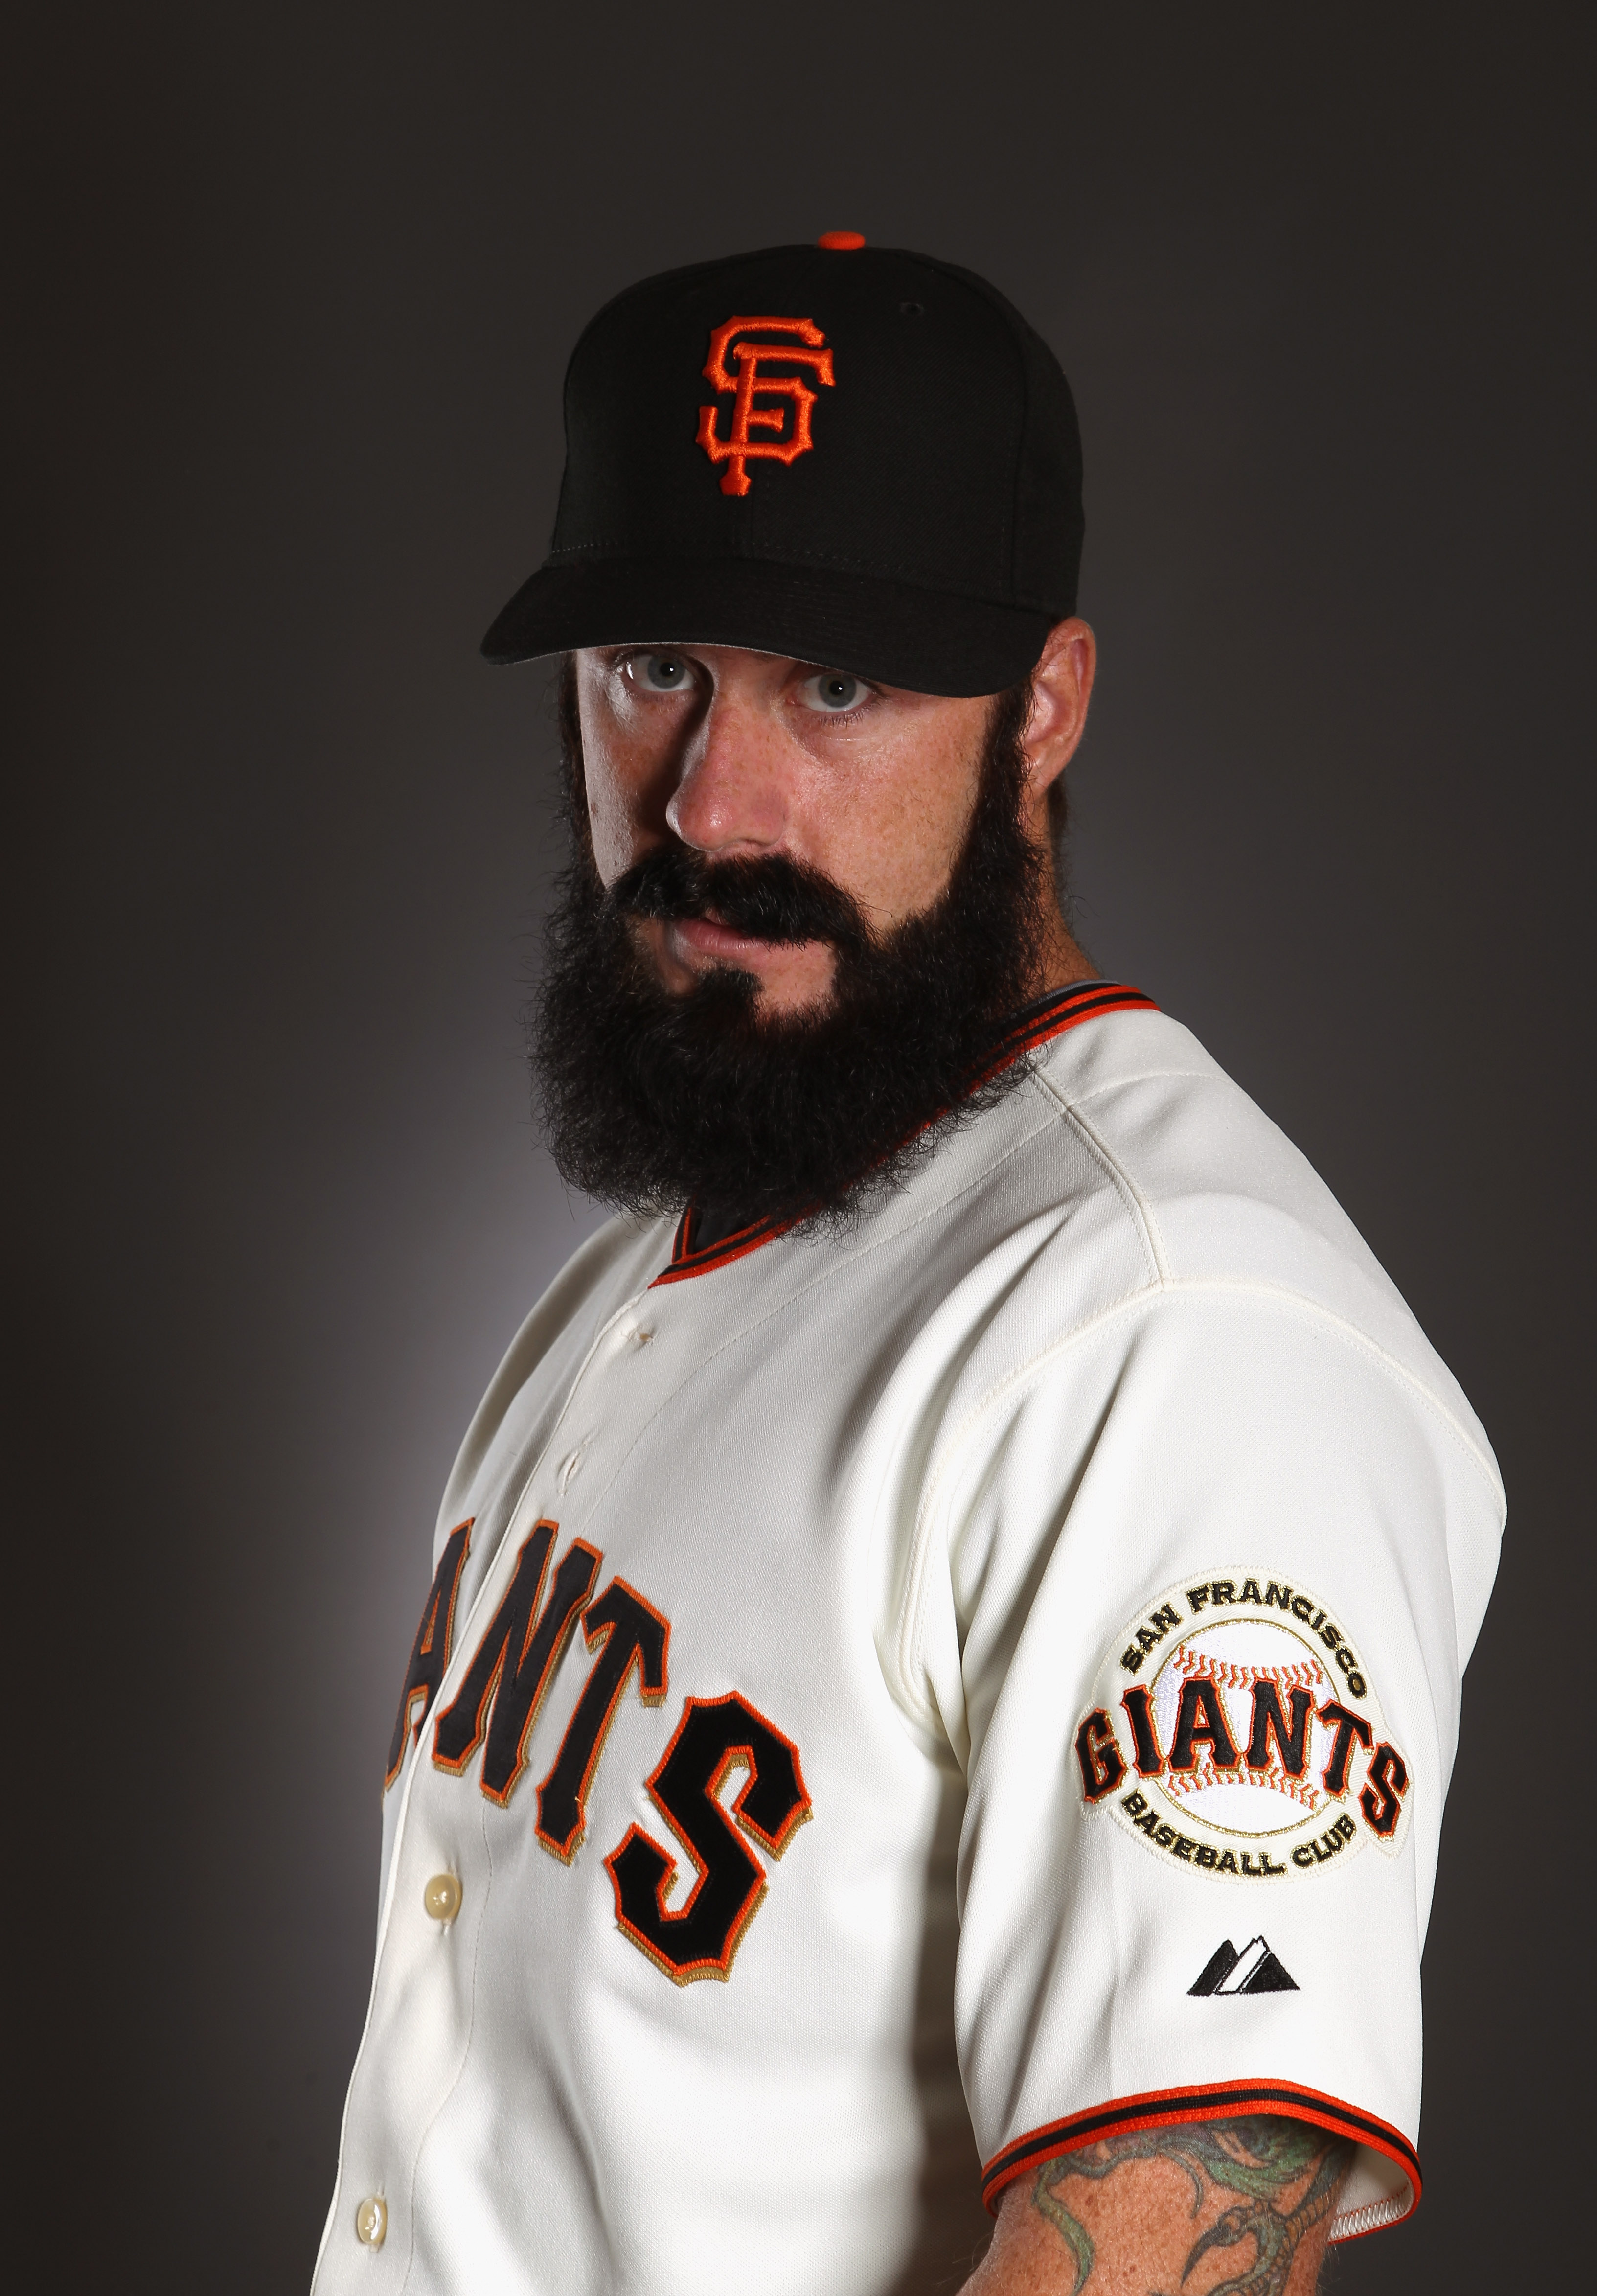 The crazy beard that kicked off baseball's facial hair obsession